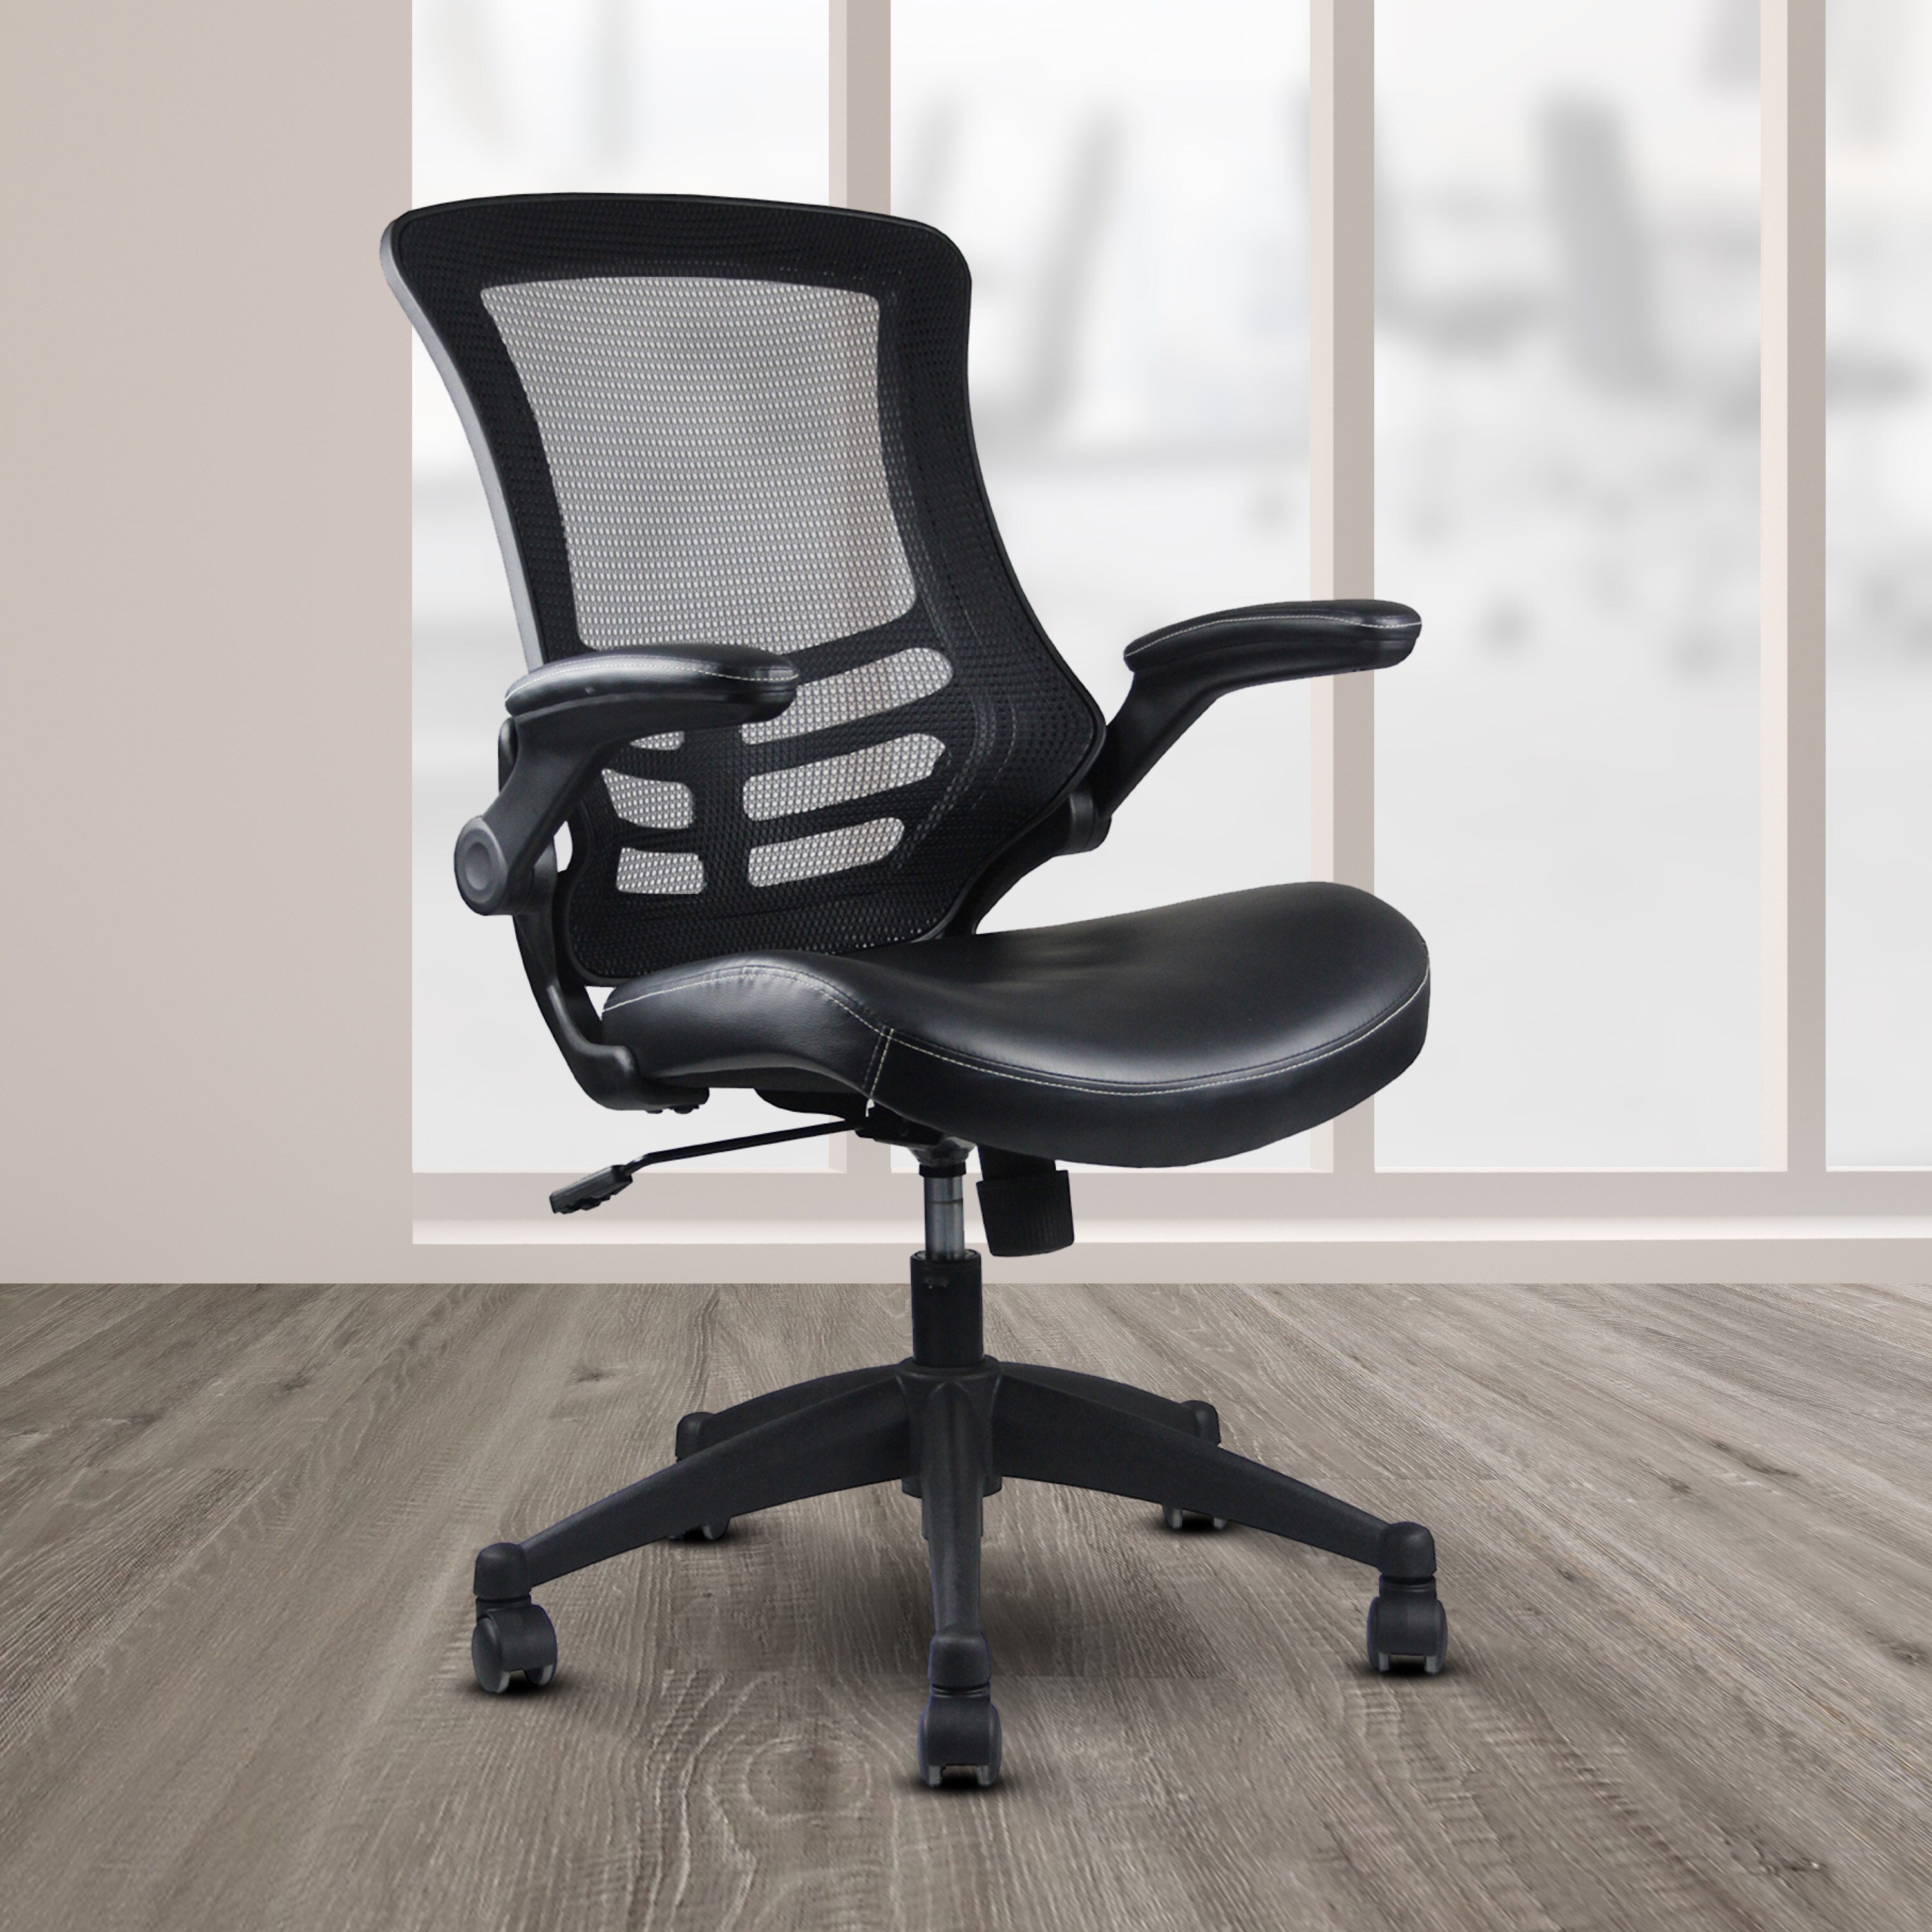 https://ak1.ostkcdn.com/images/products/is/images/direct/f948d91c6085f12e570e96f711595ff337ce9336/Techni-Mobili-Stylish-Mid-Back-Mesh-Office-Chair-with-Adjustable-Arms%2C-Black.jpg